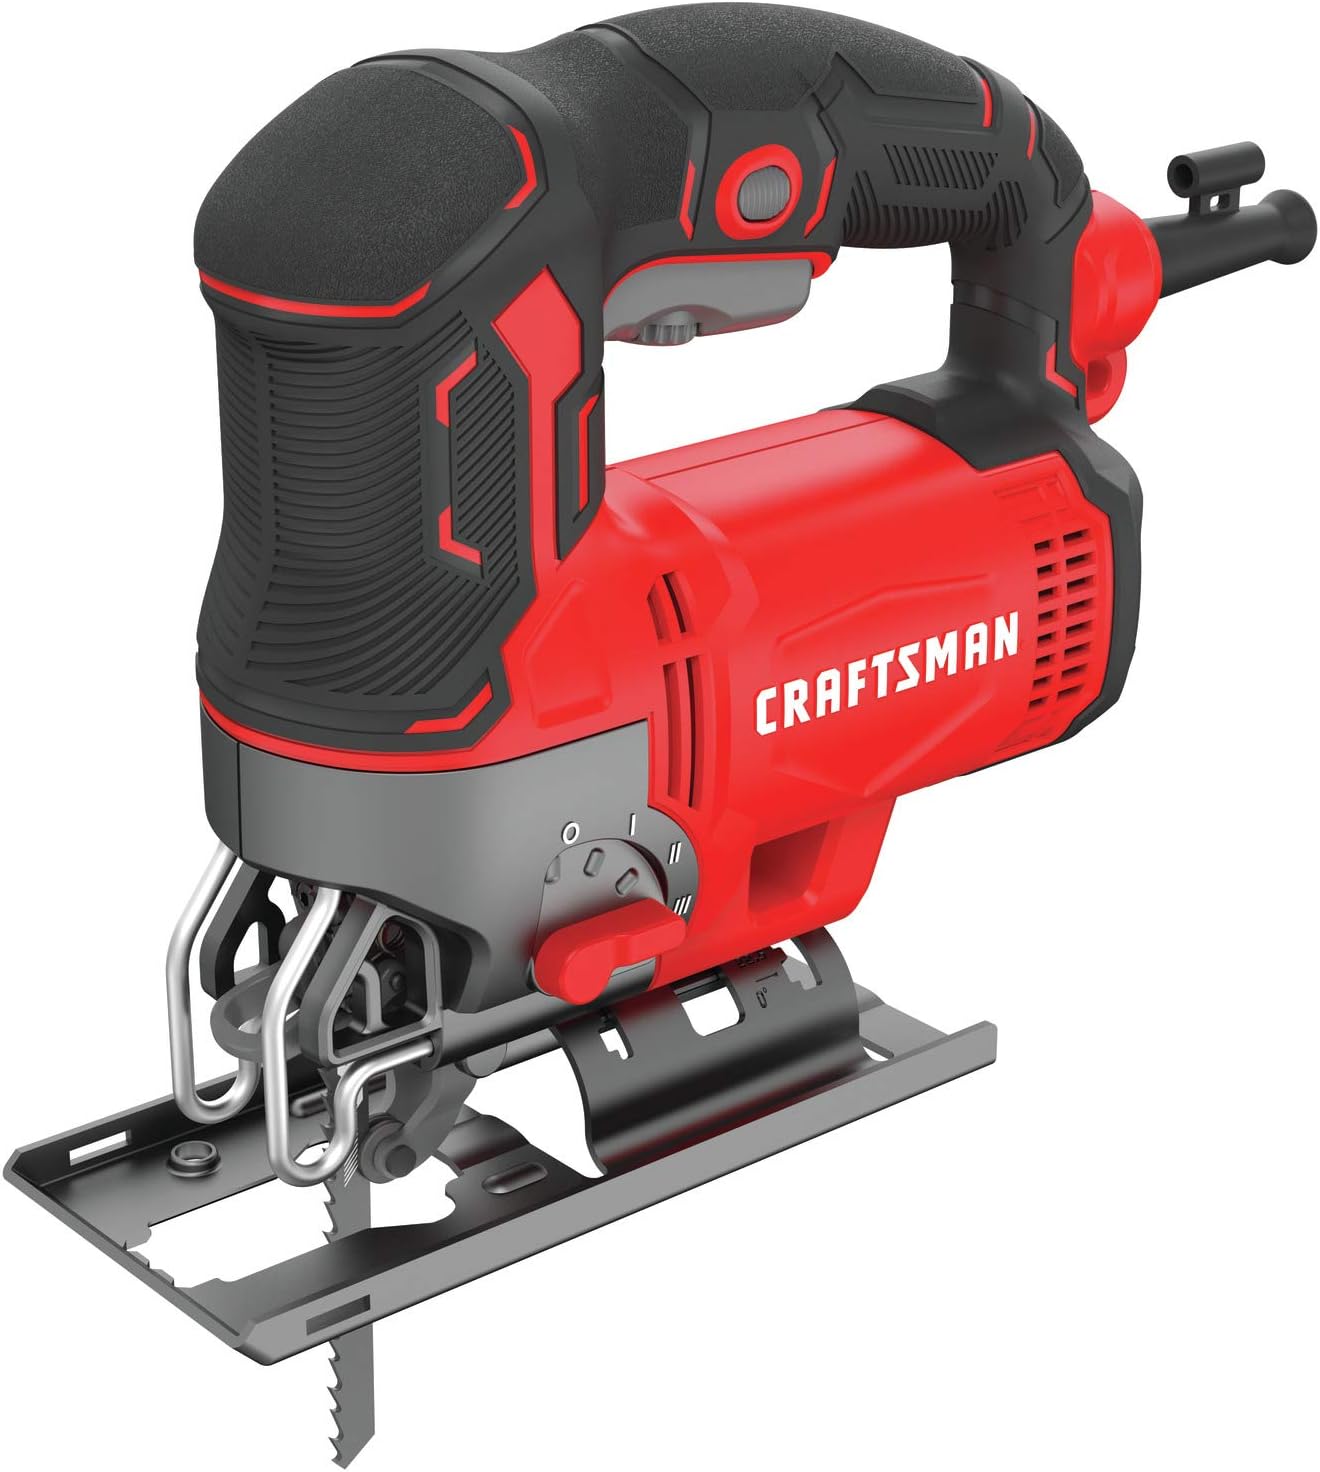 CRAFTSMAN Jig Saw, 6.0-Amp, Corded (CMES612)